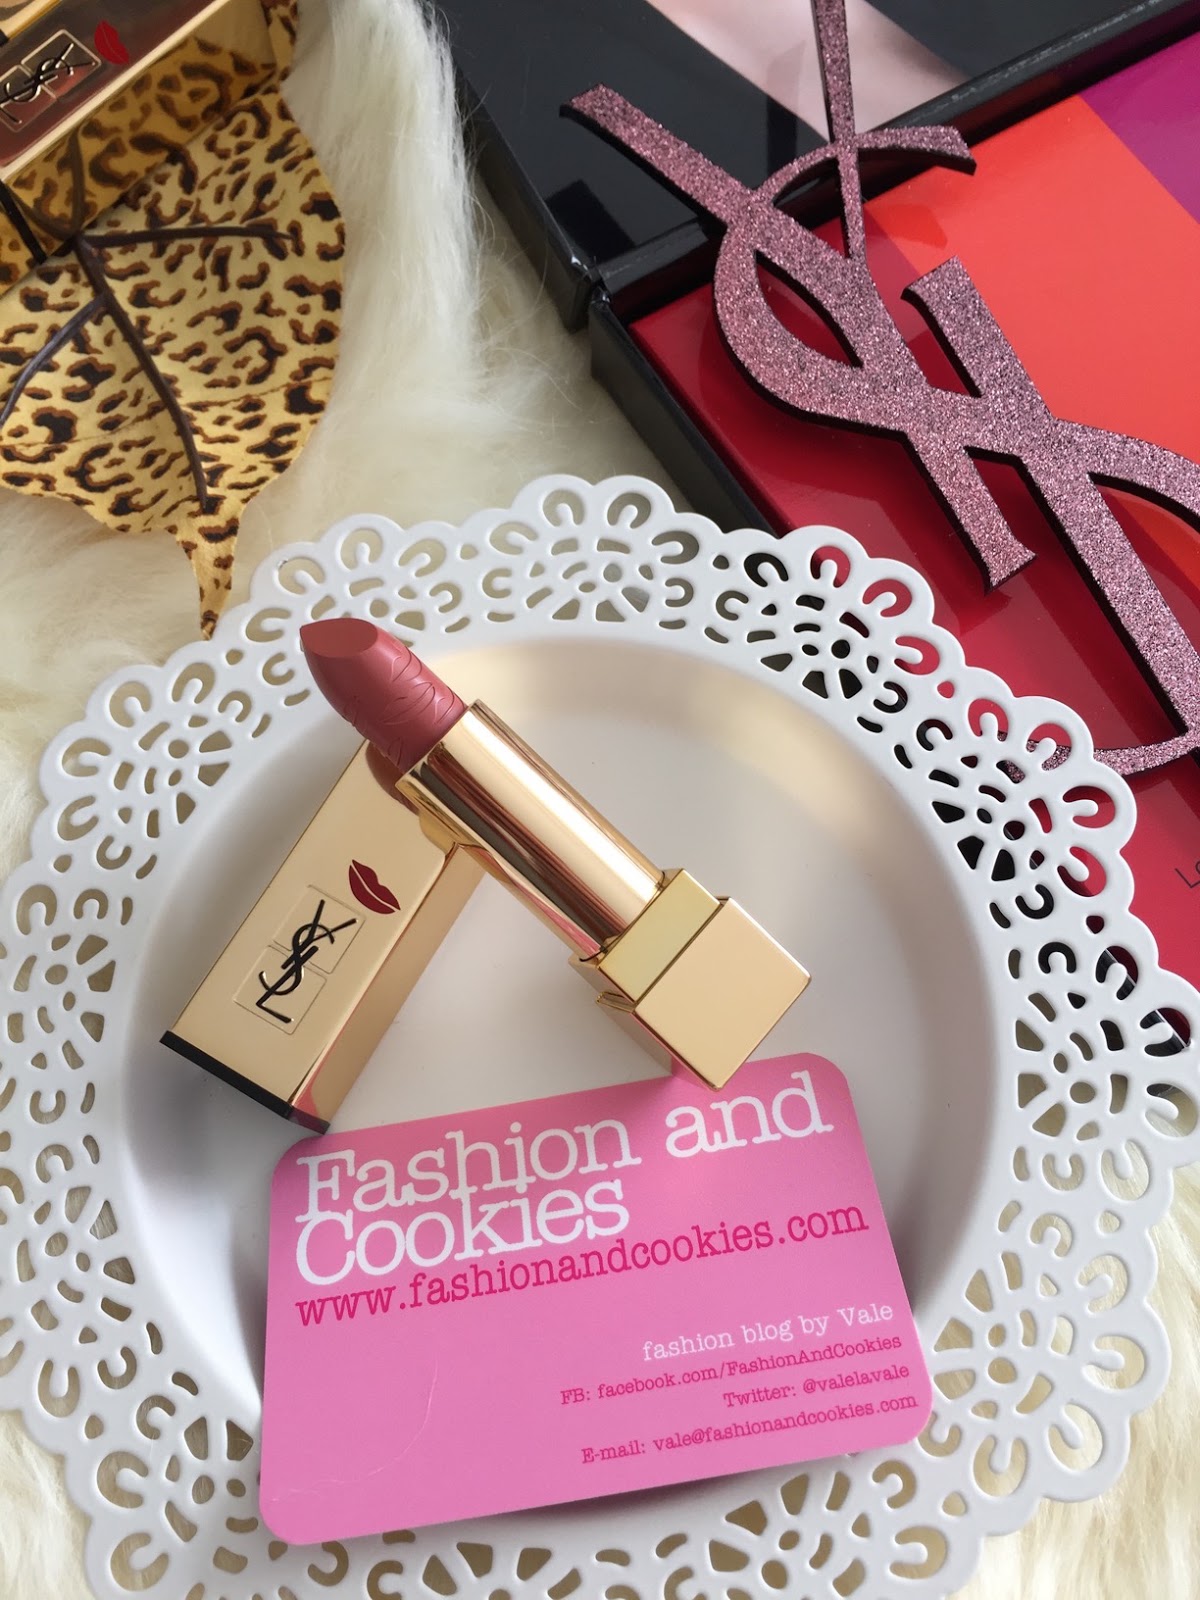 Yves Saint Laurent Rouge Pur Couture Kiss & Love Limited Edition, n. 70 Le Nu, on Fashion and Cookies fashion and beauty blog, beauty blogger